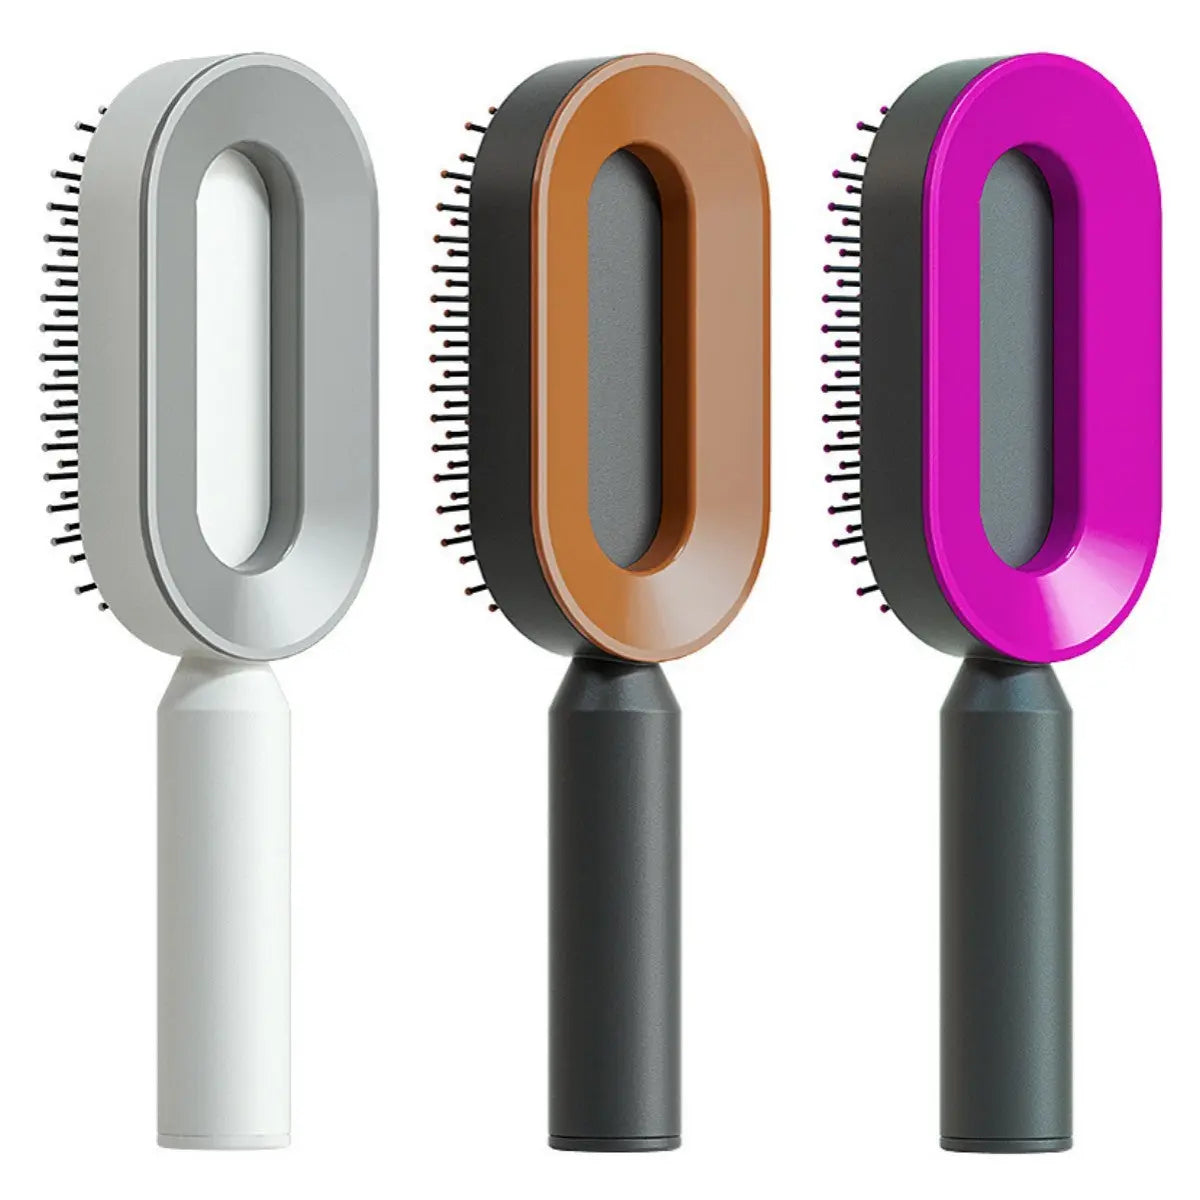 Self Cleaning Hair Brush For Women One-key Cleaning Hair Loss Airbag Massage Scalp Comb Anti-Static Hairbrush - Trending's Arena Beauty Self Cleaning Hair Brush For Women One-key Cleaning Hair Loss Airbag Massage Scalp Comb Anti-Static Hairbrush FACE Set-Z